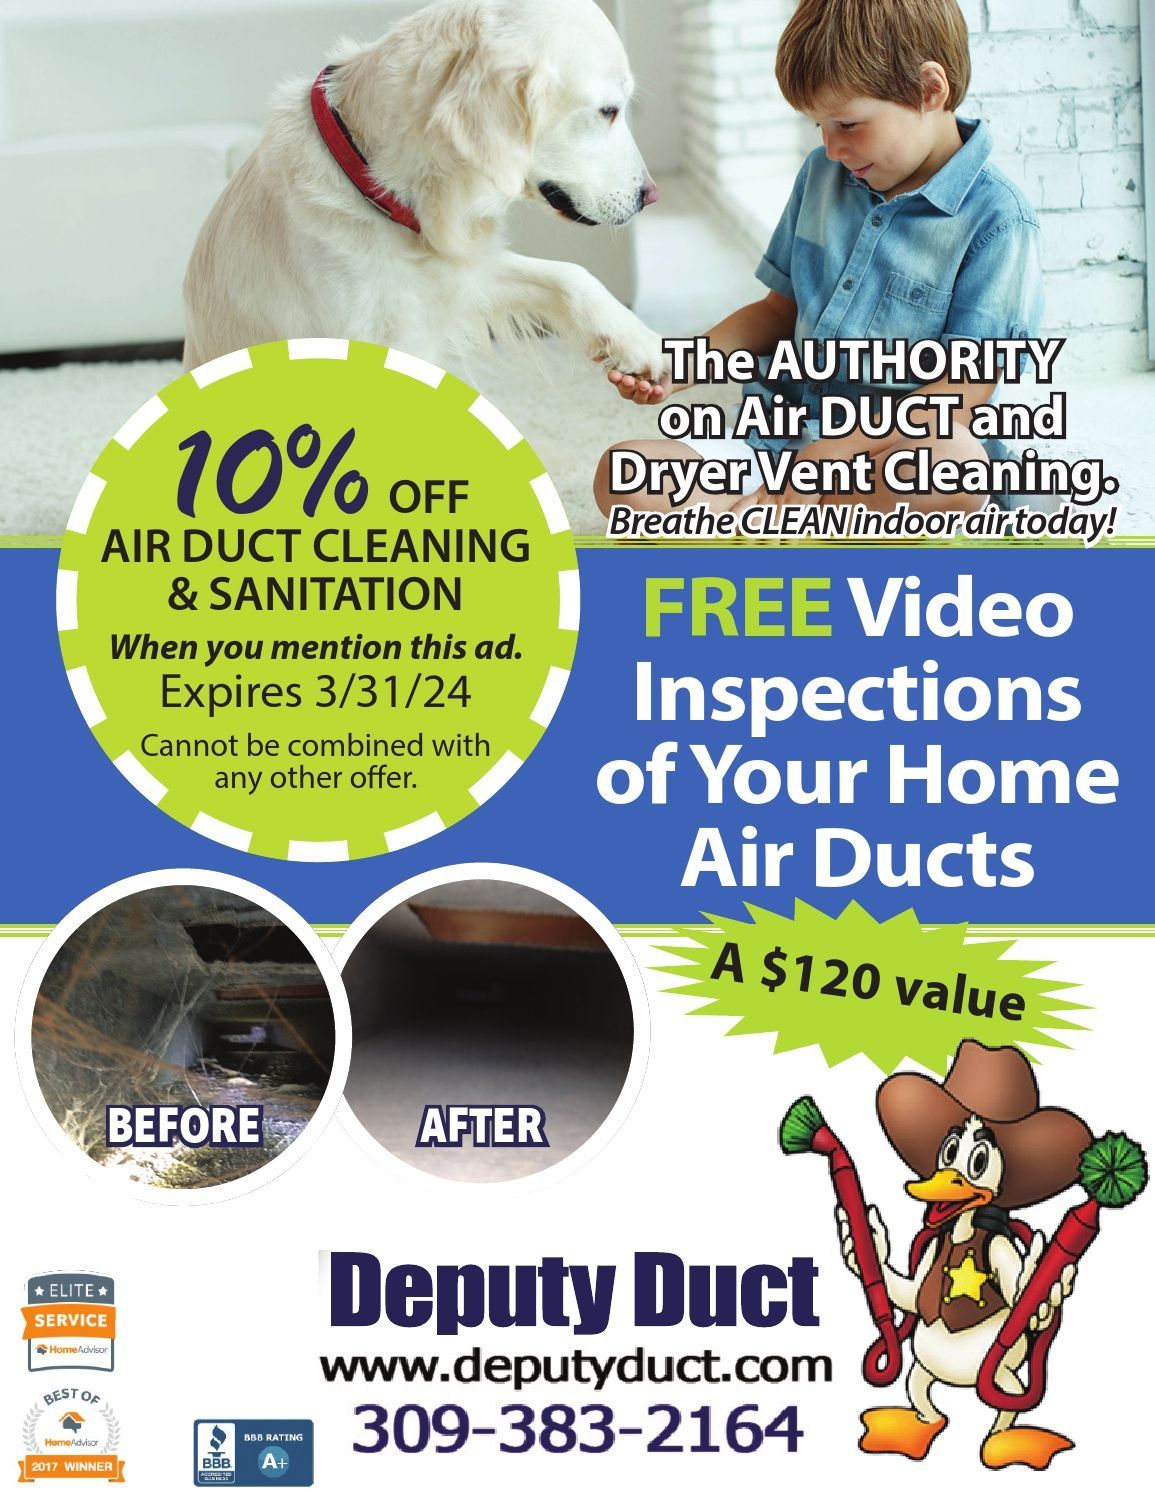 Deputy Duct The Authority on Duct Cleaning and Dryer Vent Cleaning, 10% off coupon Germantown Hills, IL